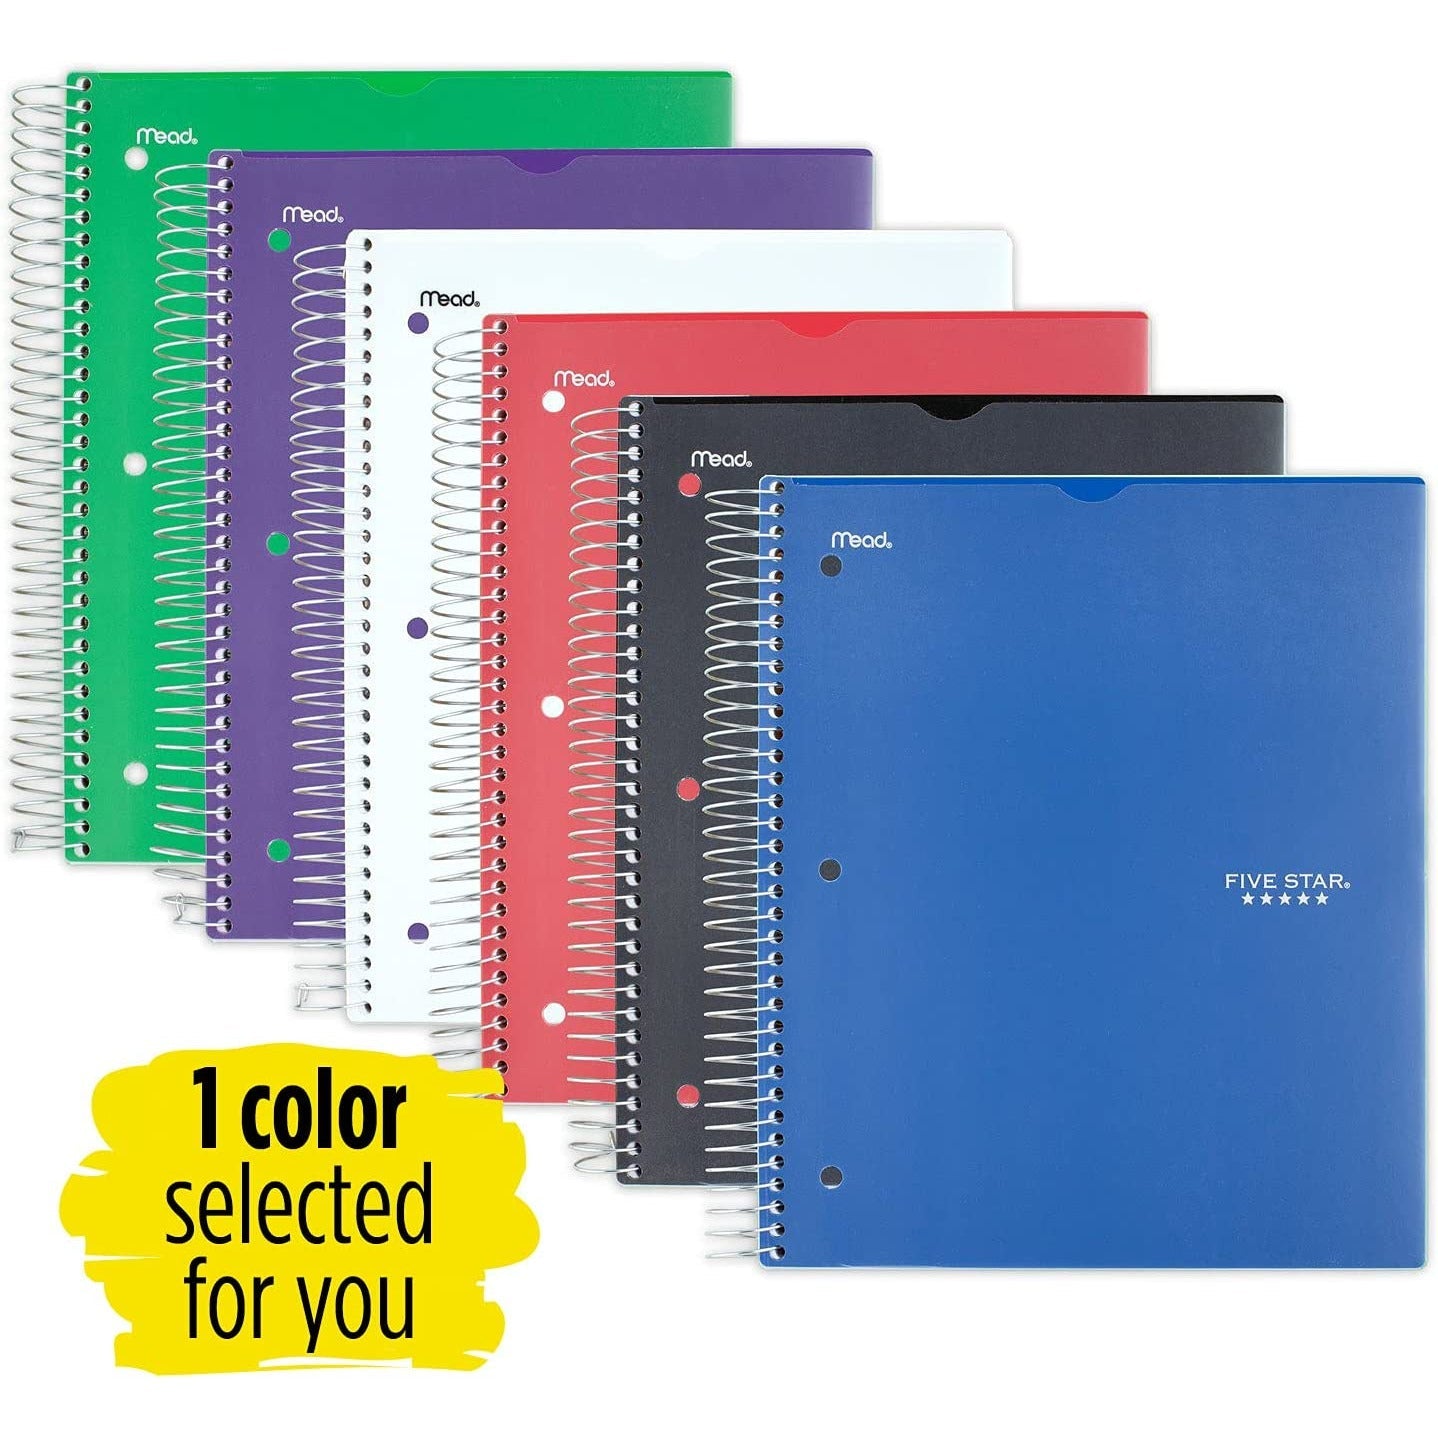 NEW Mead Five Star 5 Subject Customizable College Ruled 200 Sheets Spiral Notebook - A4